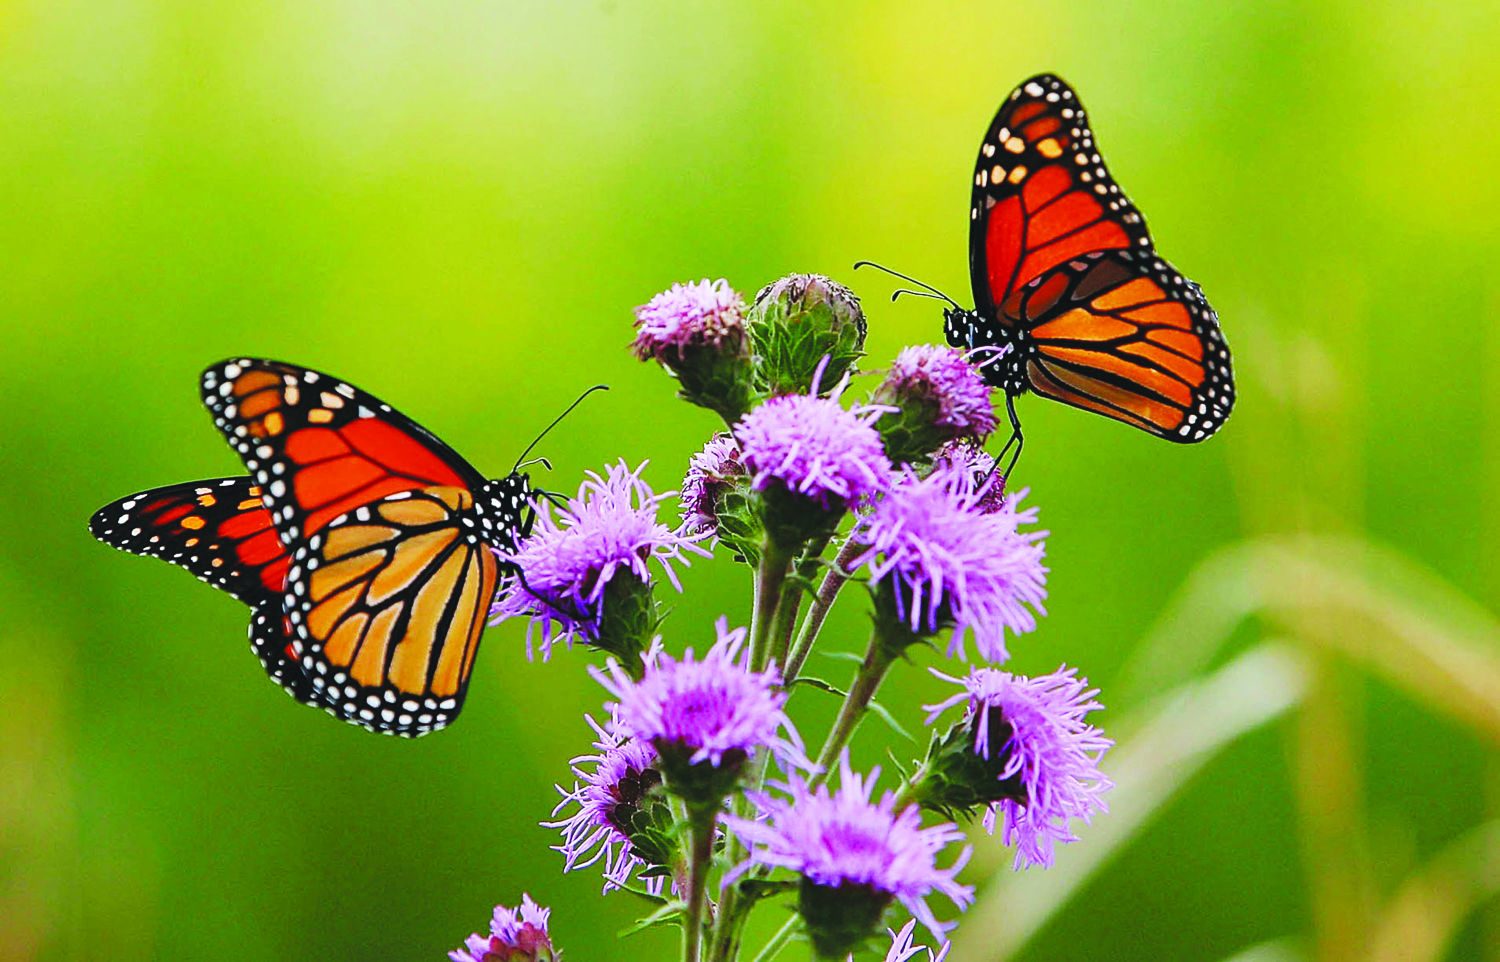 Two+monarch+butterflies+feed+on+a+Blazing+Star+plant+at+the+USDA+Forest+Services+Midewin+National+Tallgrass+Prairie+in+Illinois%2C+Friday%2C+Sept.+1%2C+2006.